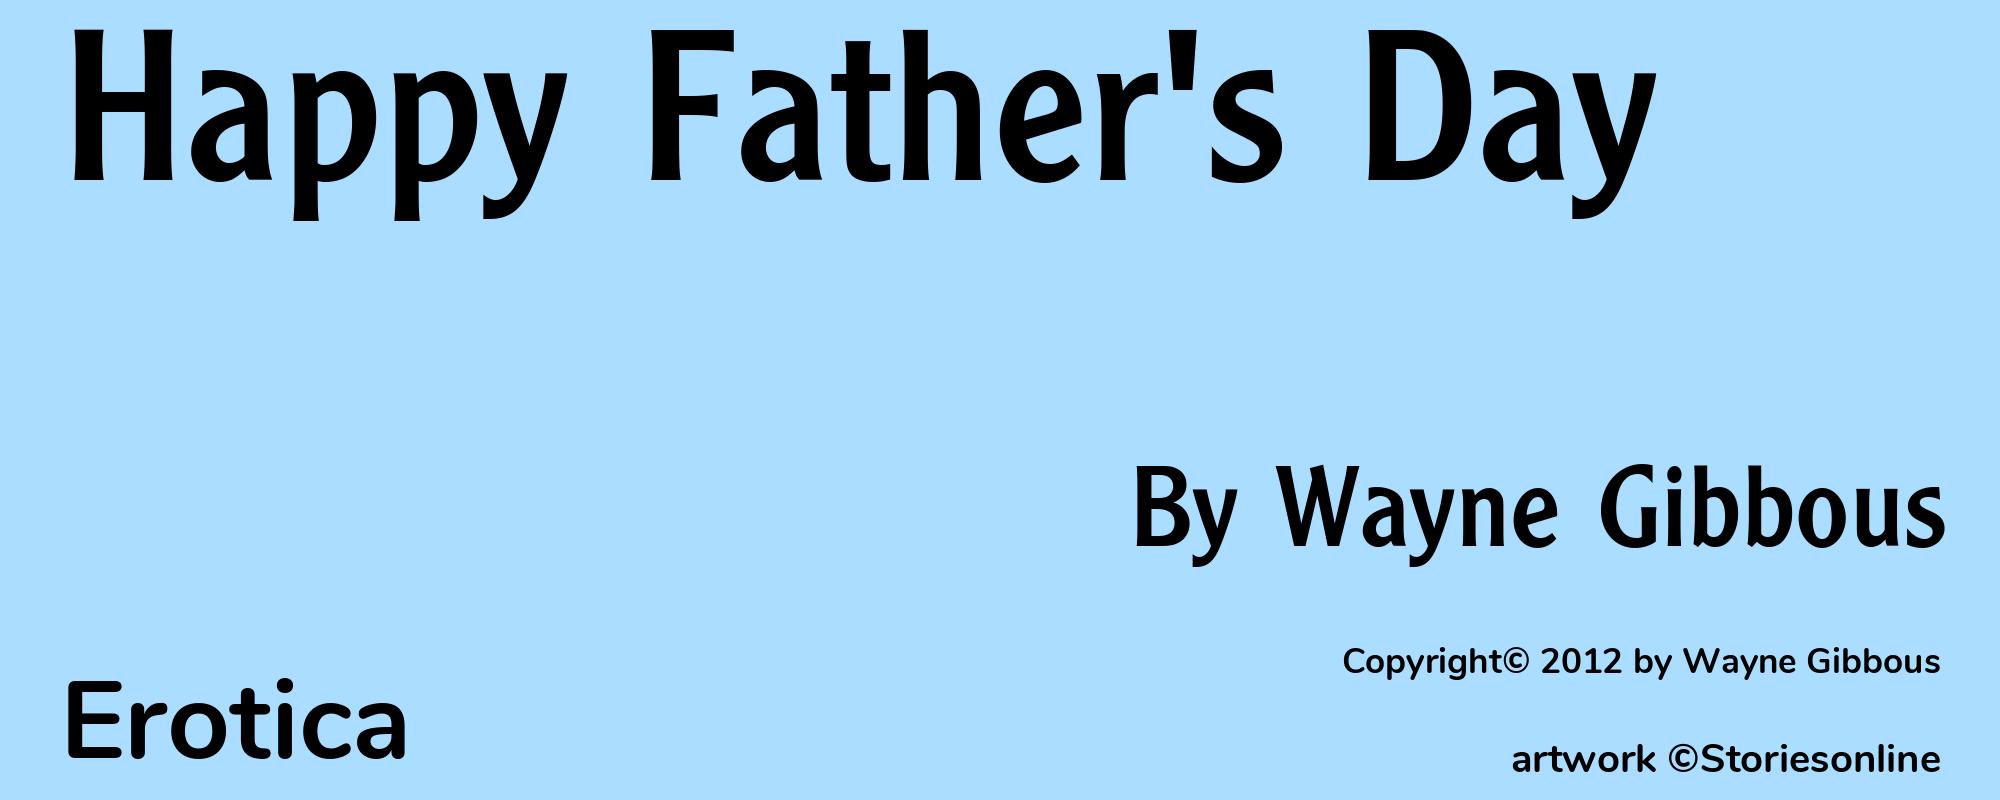 Happy Father's Day - Cover